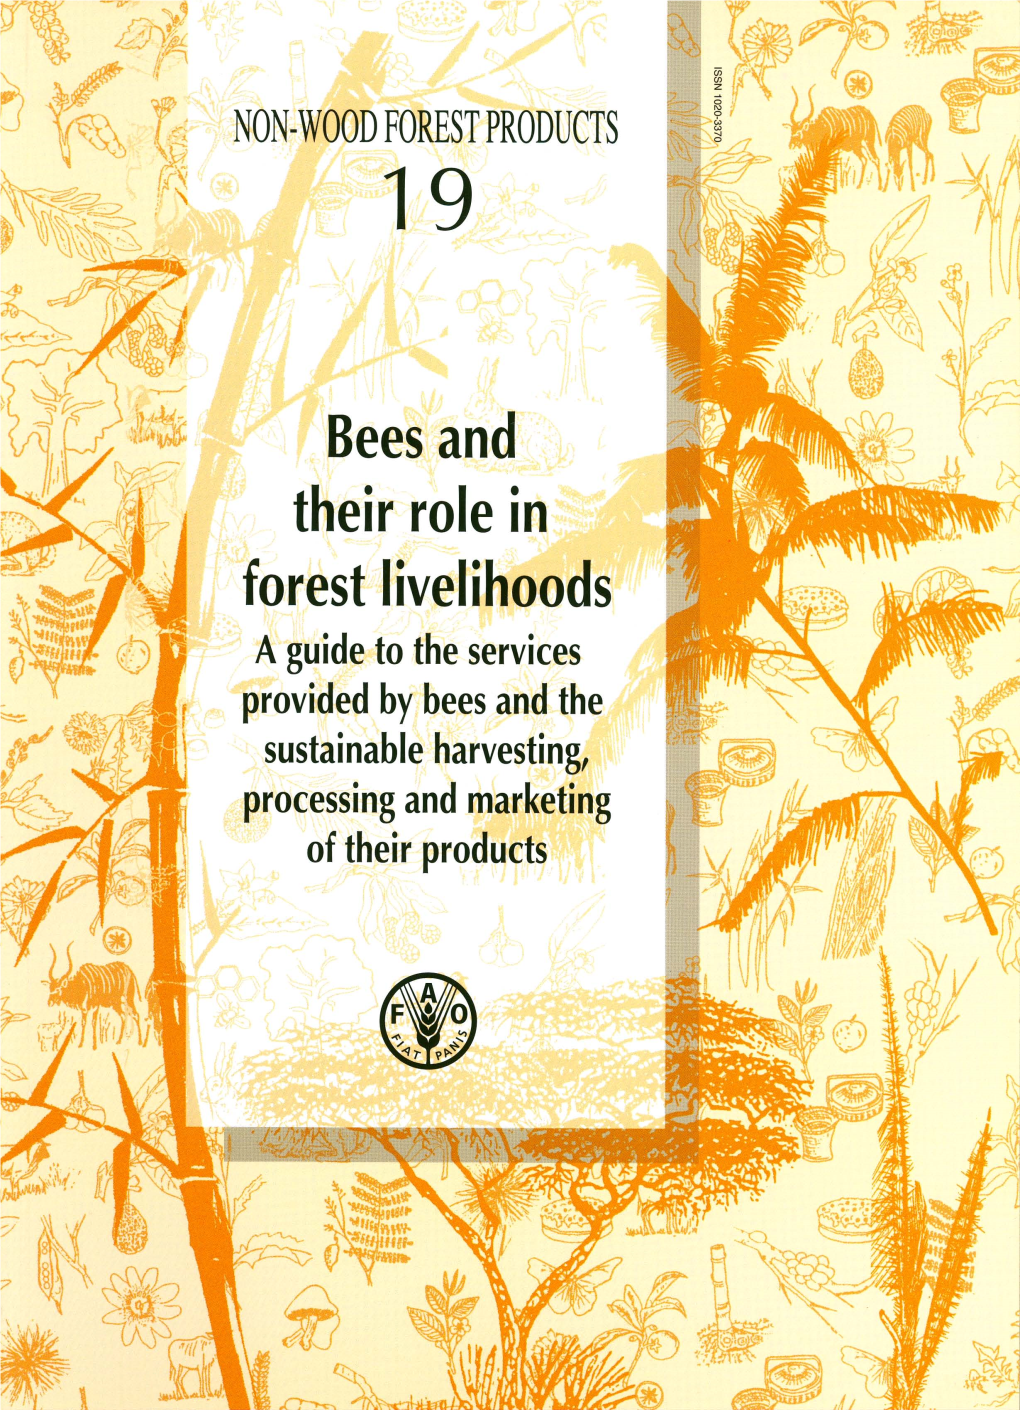 Bees and Their Role in Forest Livelihoods a Guide to the Services Provided by Bees and the Sustainable Harvesting, Processing and Marketing of Their Products